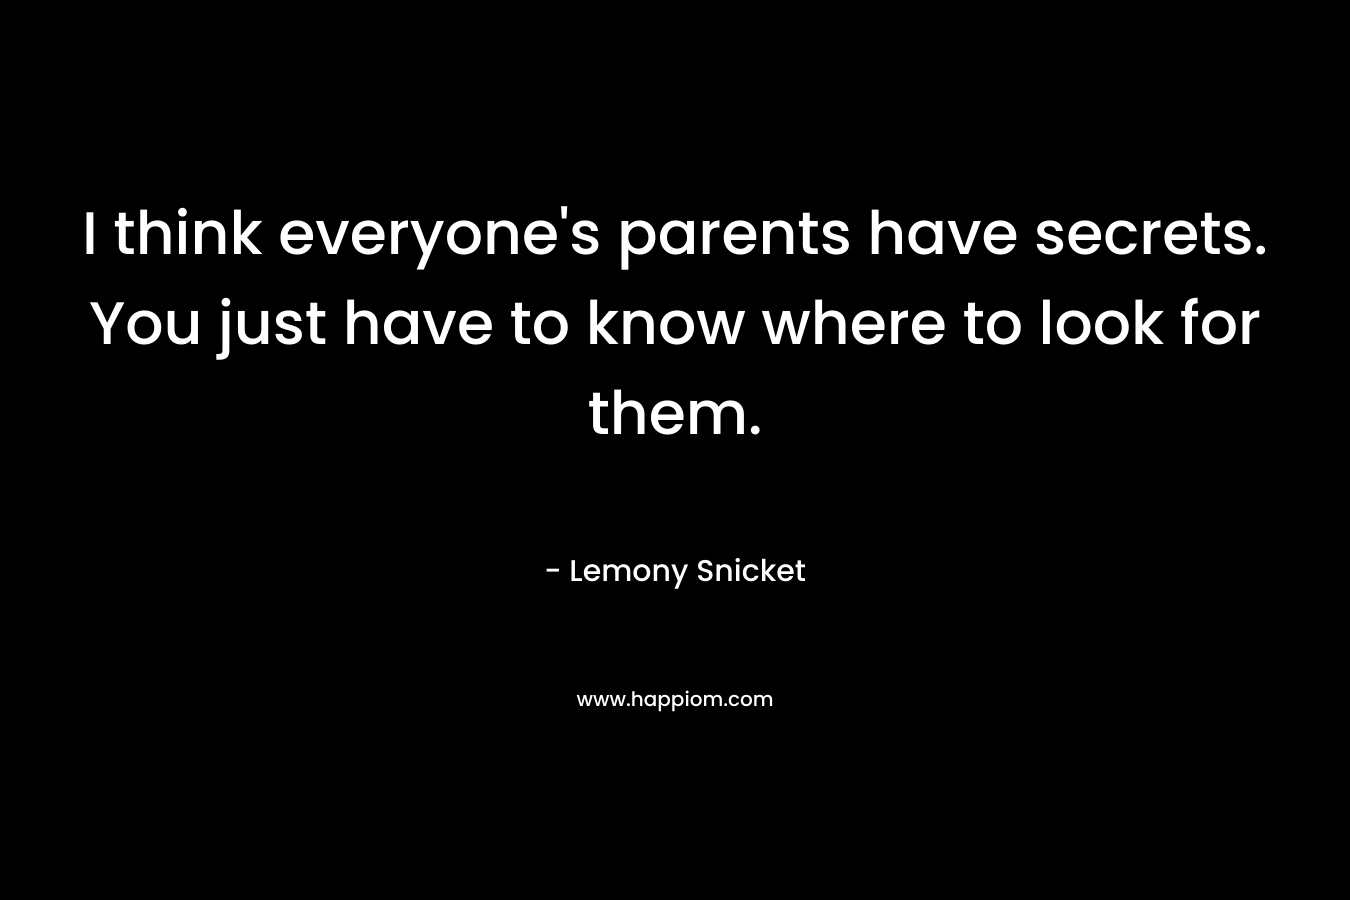 I think everyone’s parents have secrets. You just have to know where to look for them. – Lemony Snicket